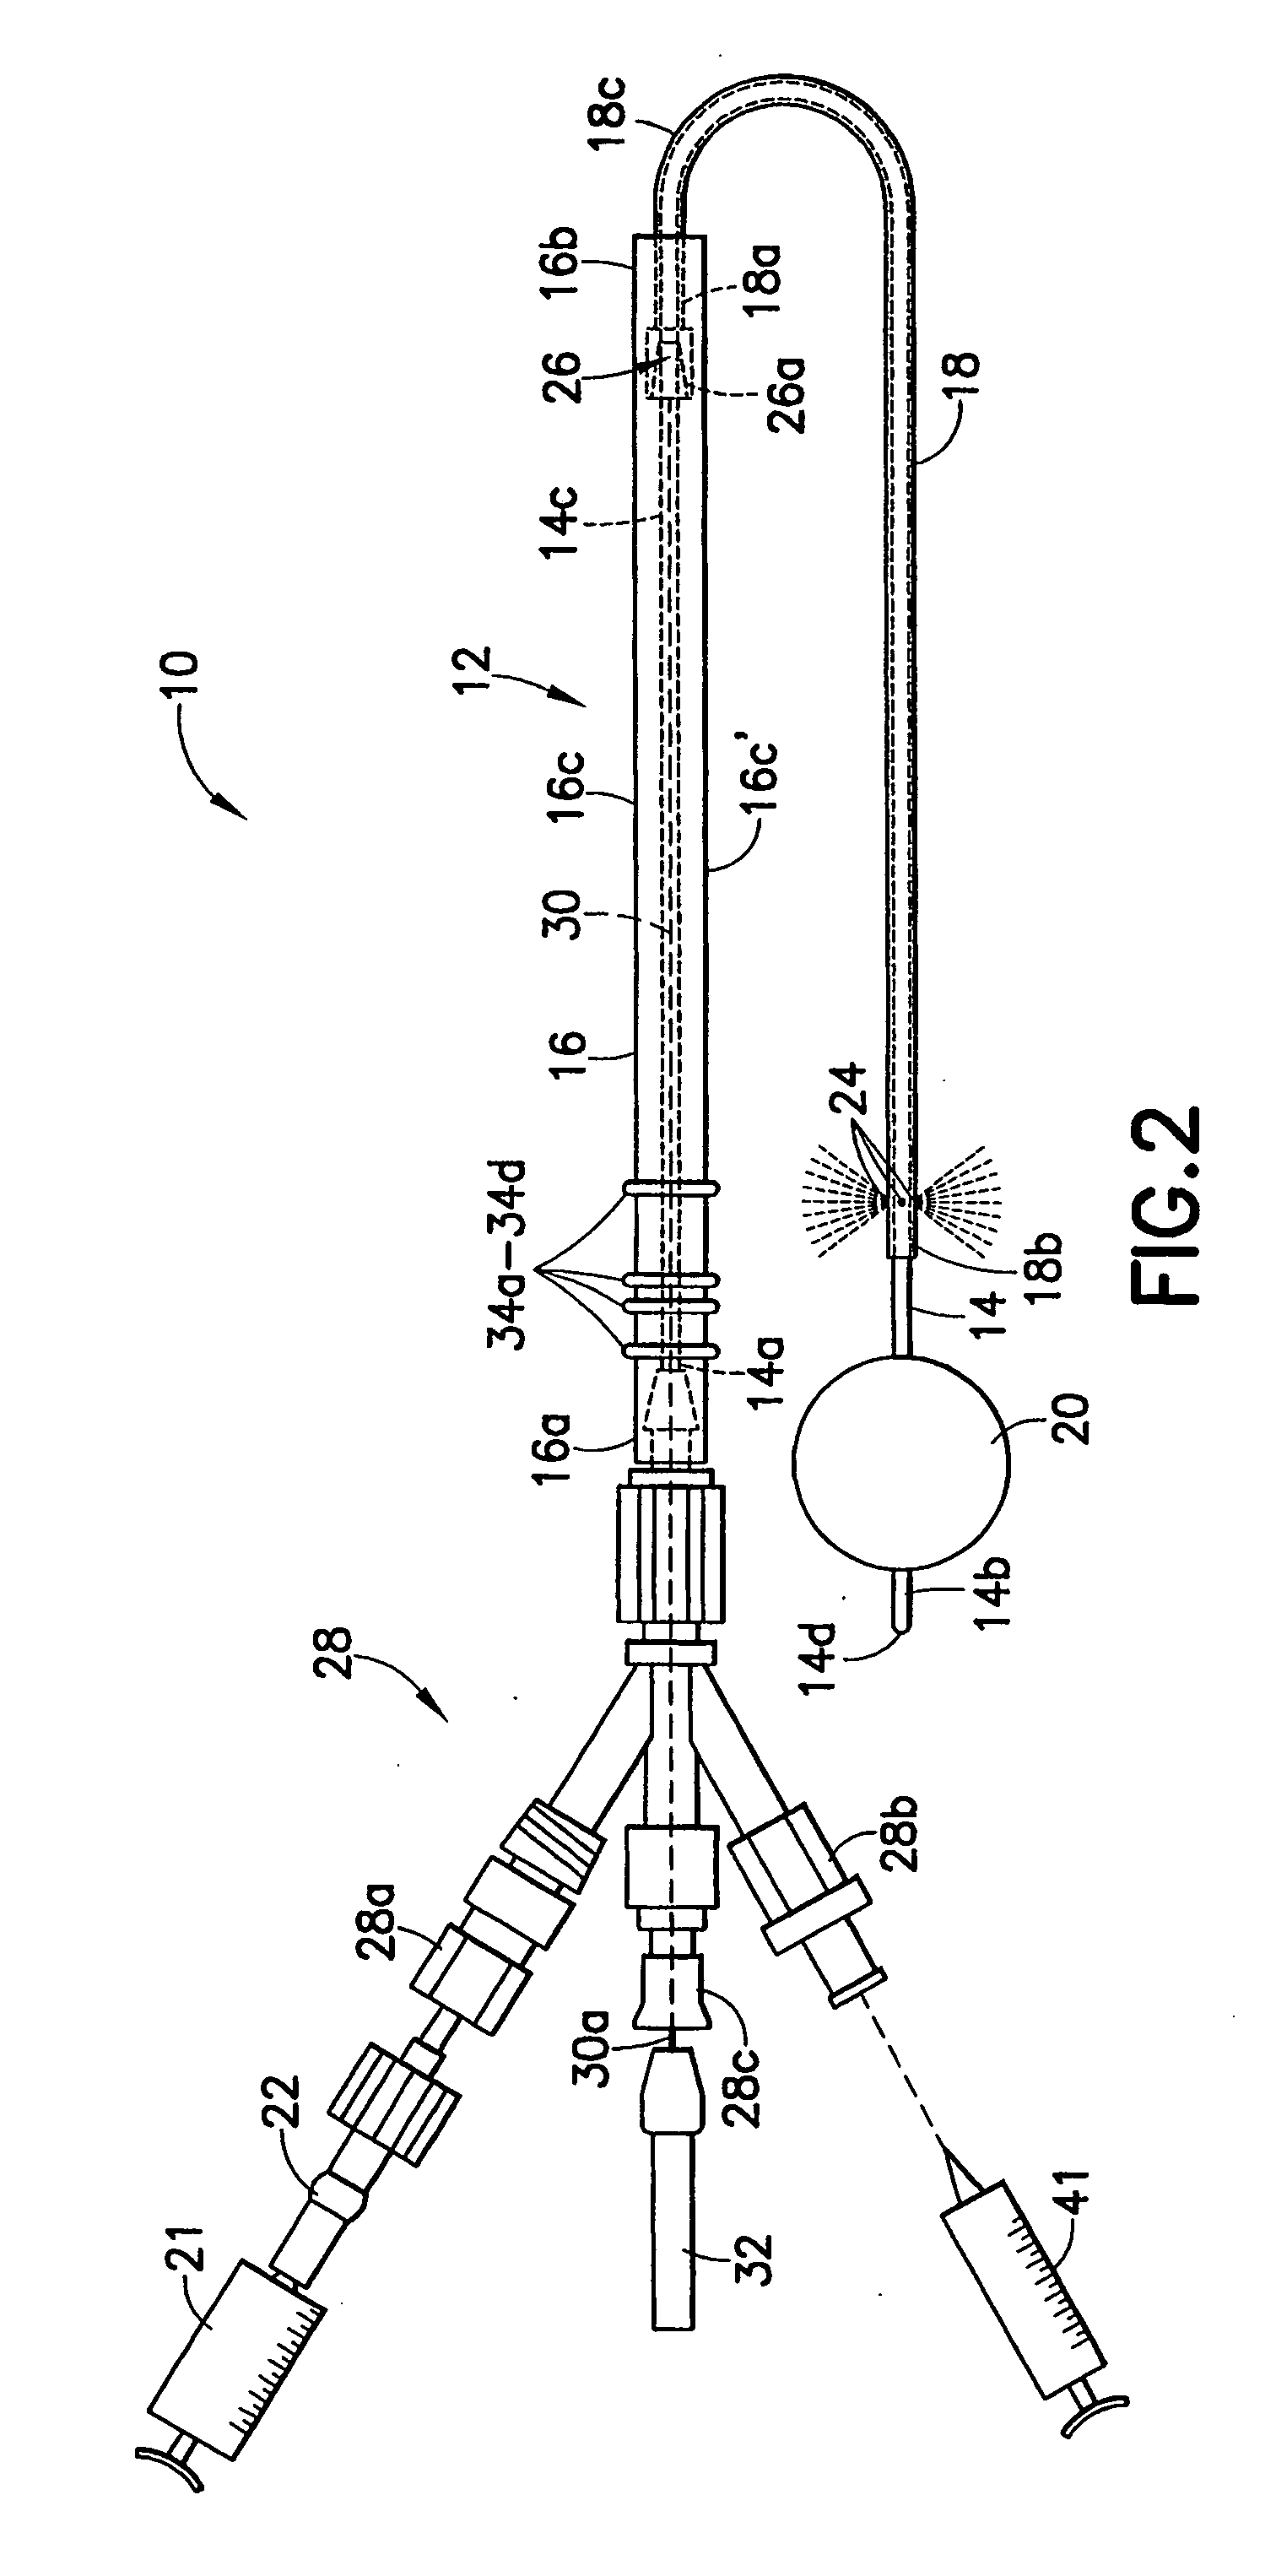 Occludable intravascular catheter for drug delivery and method of using the same